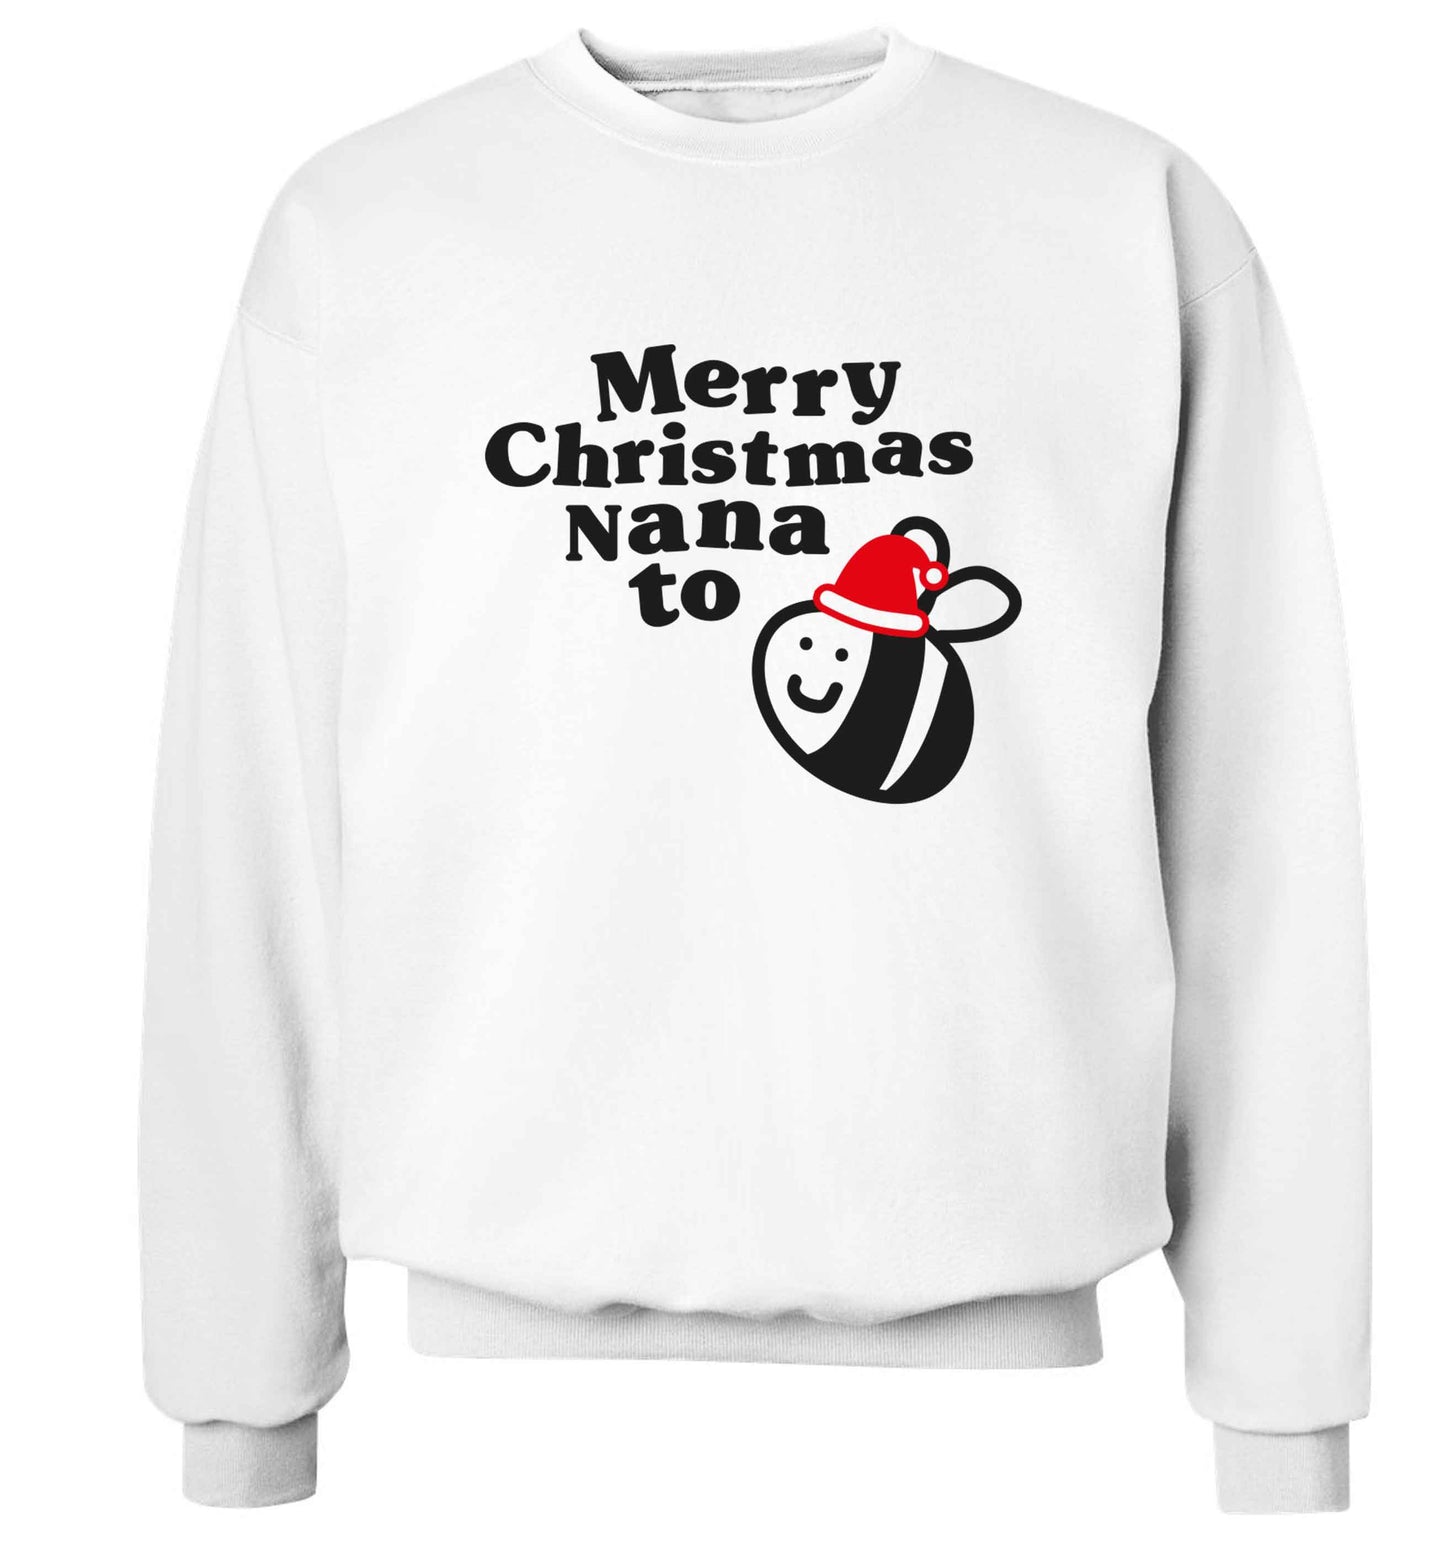 Merry Christmas nana to be Adult's unisex white Sweater 2XL